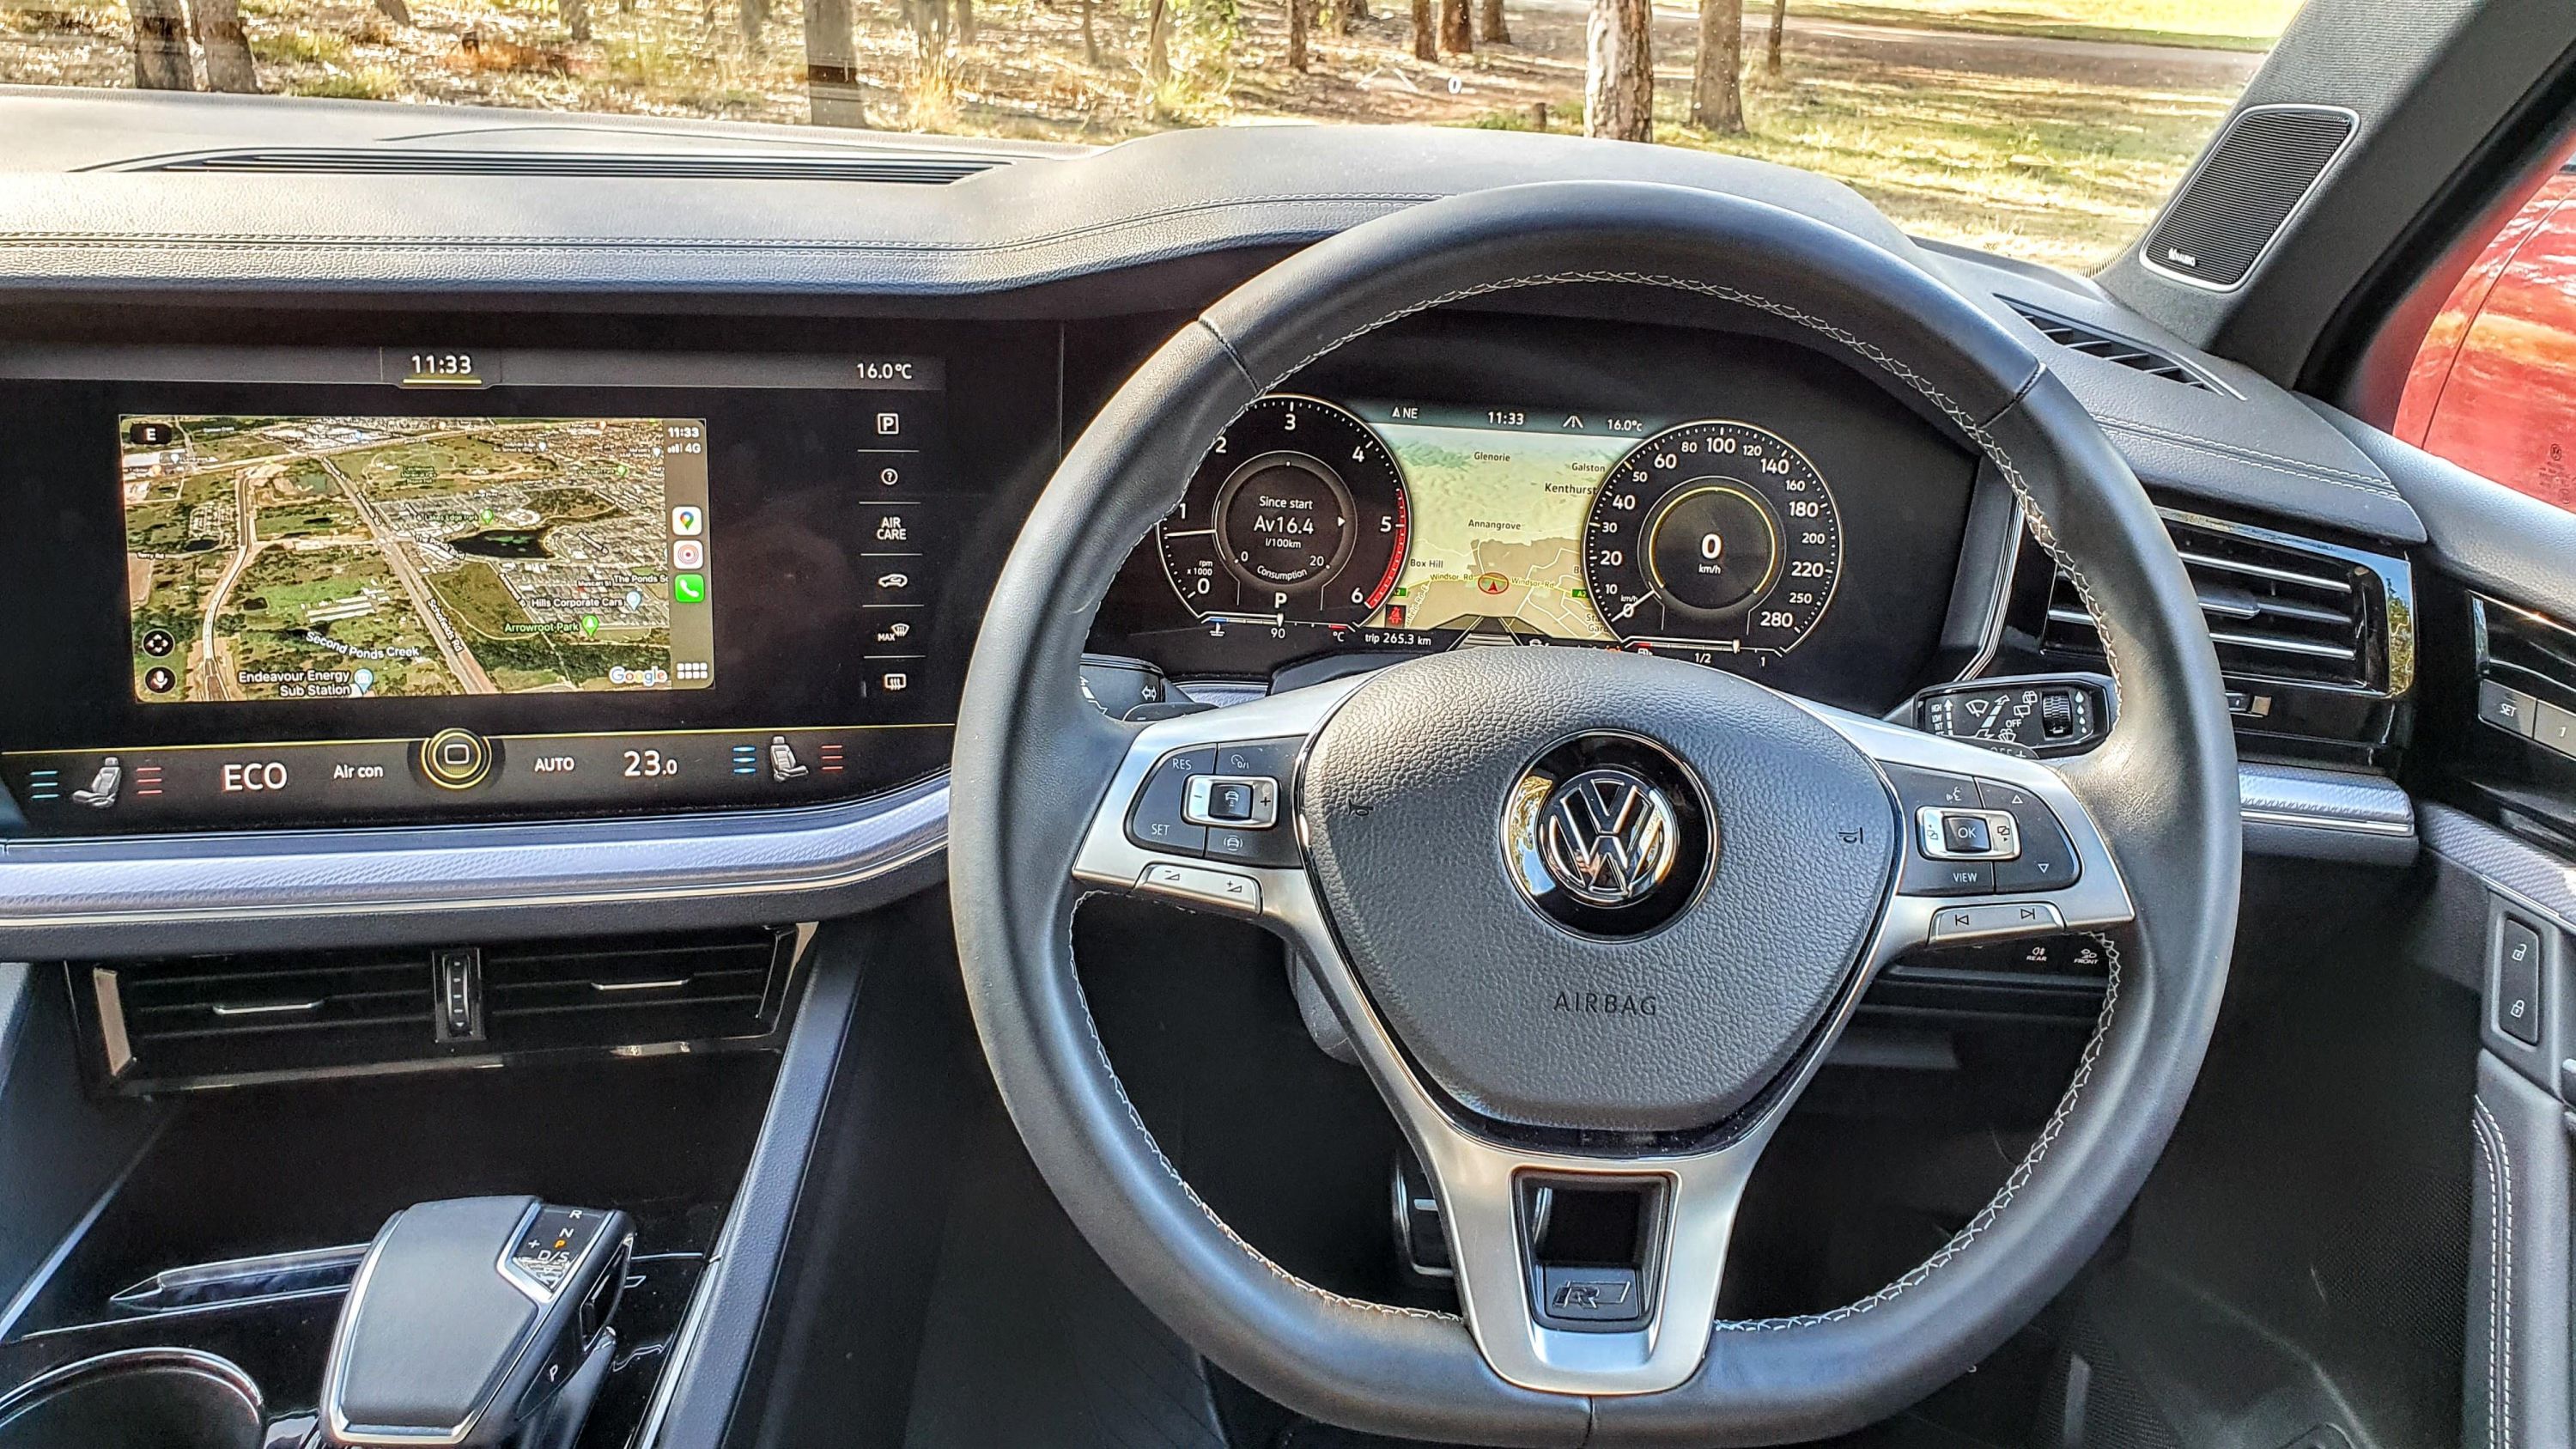 Volkswagen Touareg: Discover Premium, Innovision Package review